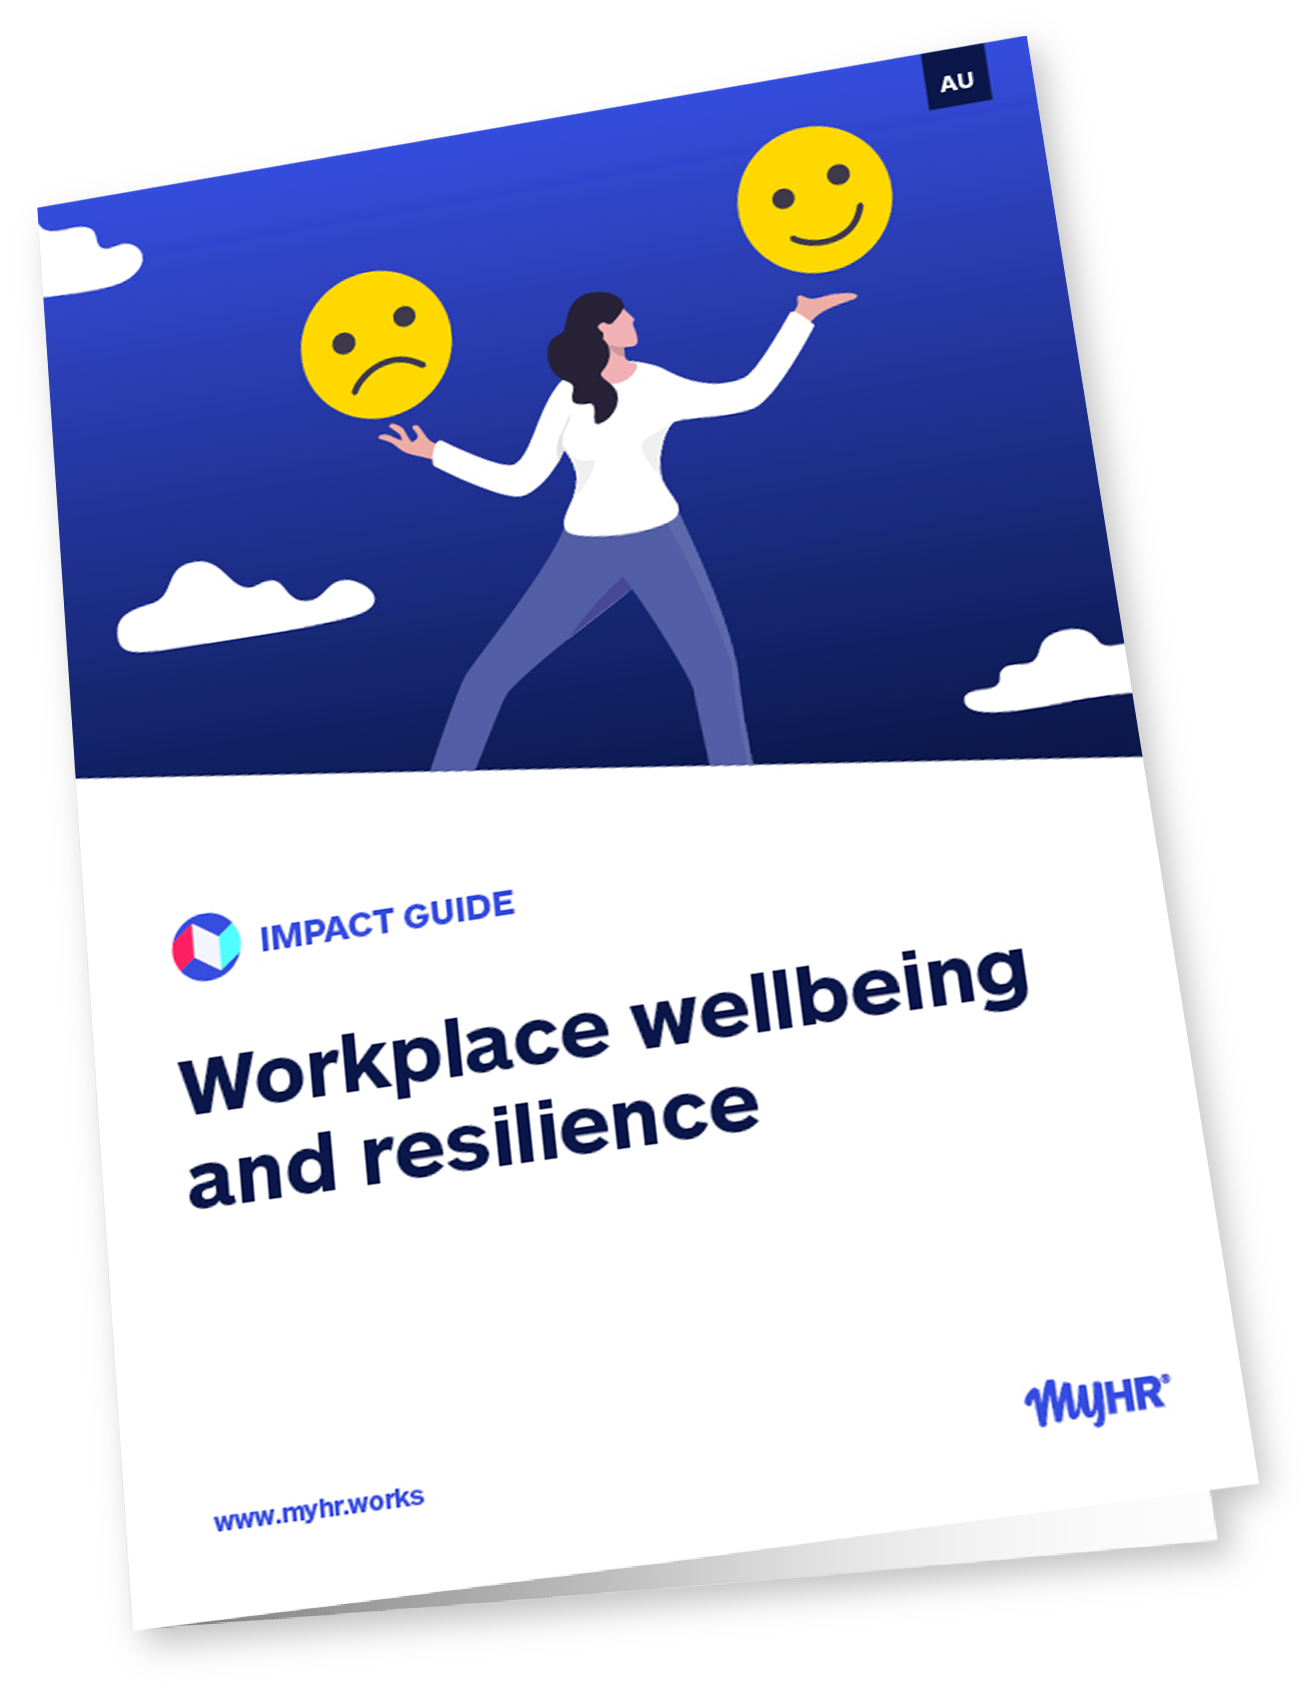 MYHR_AU-Workplace-wellbeing-and-resilienceMockup_Impact-Guide